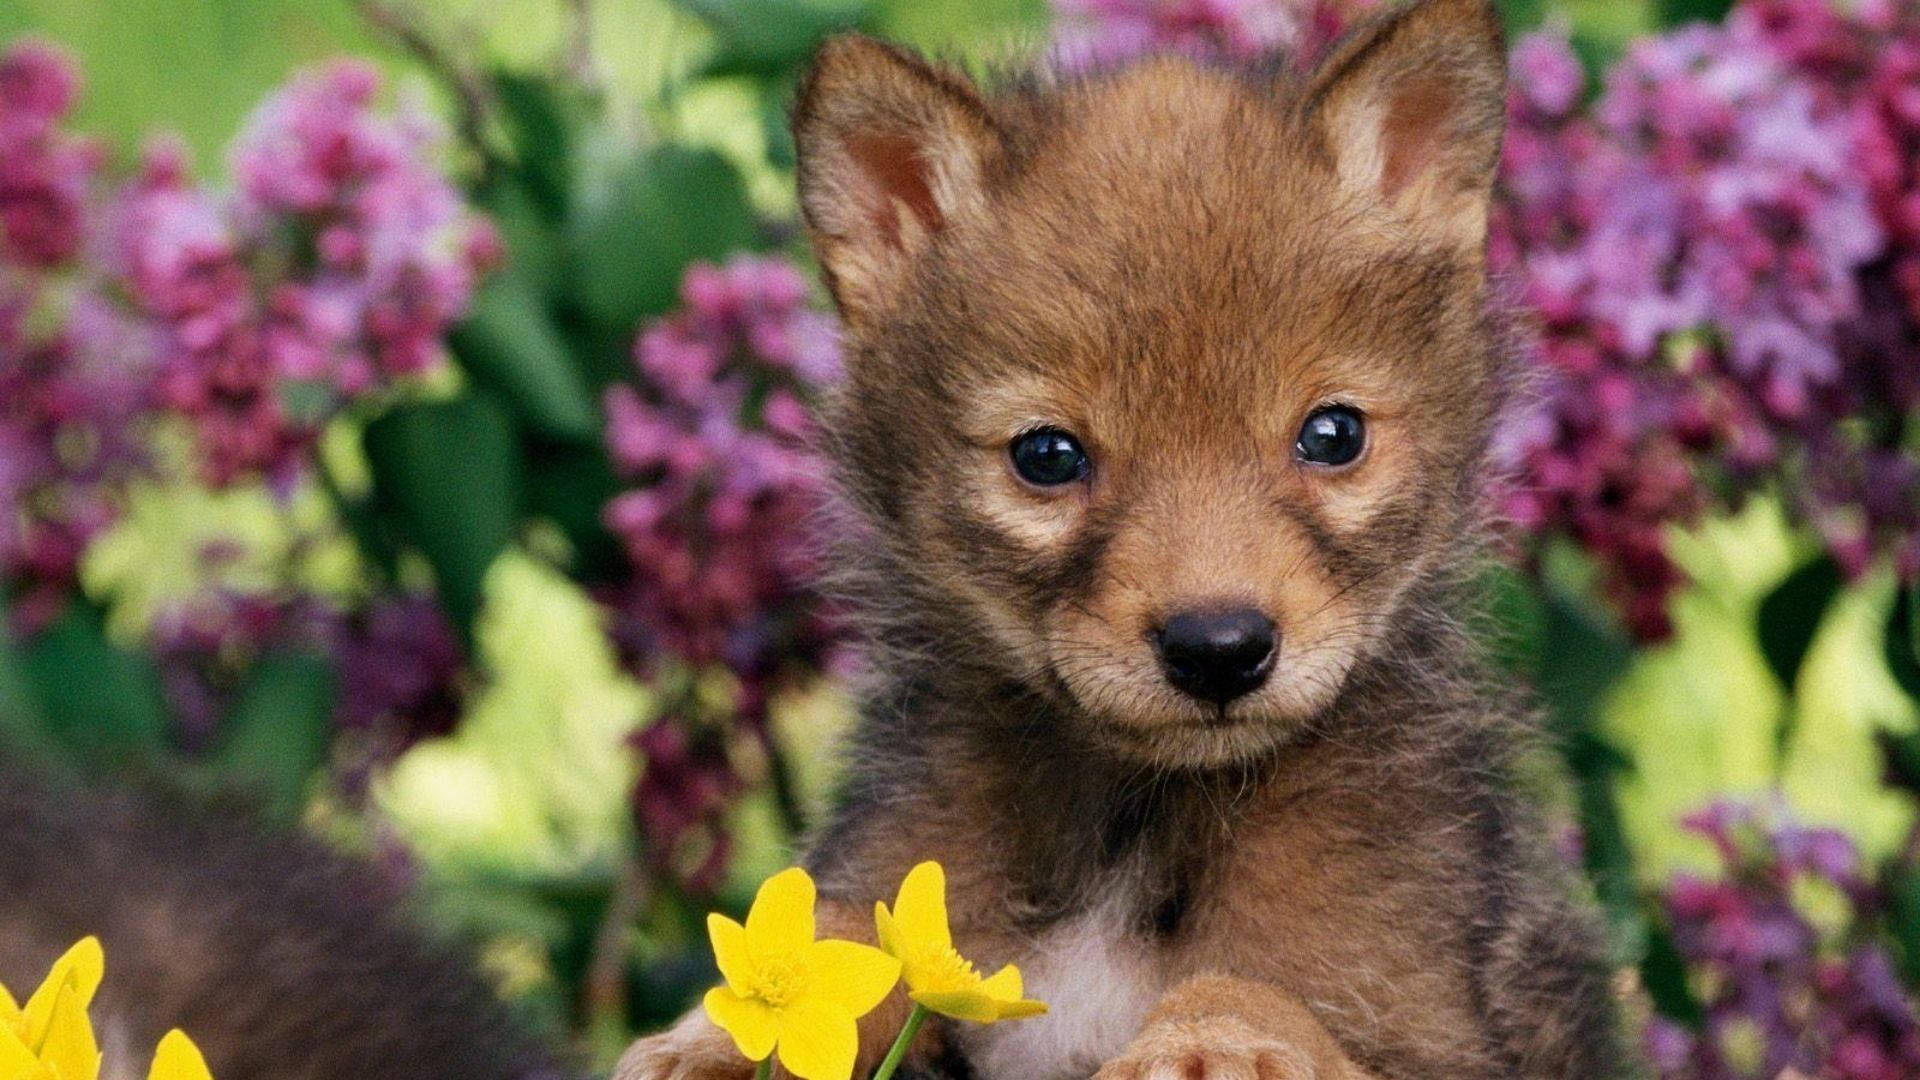 Baby Animal Puppy With Flowers